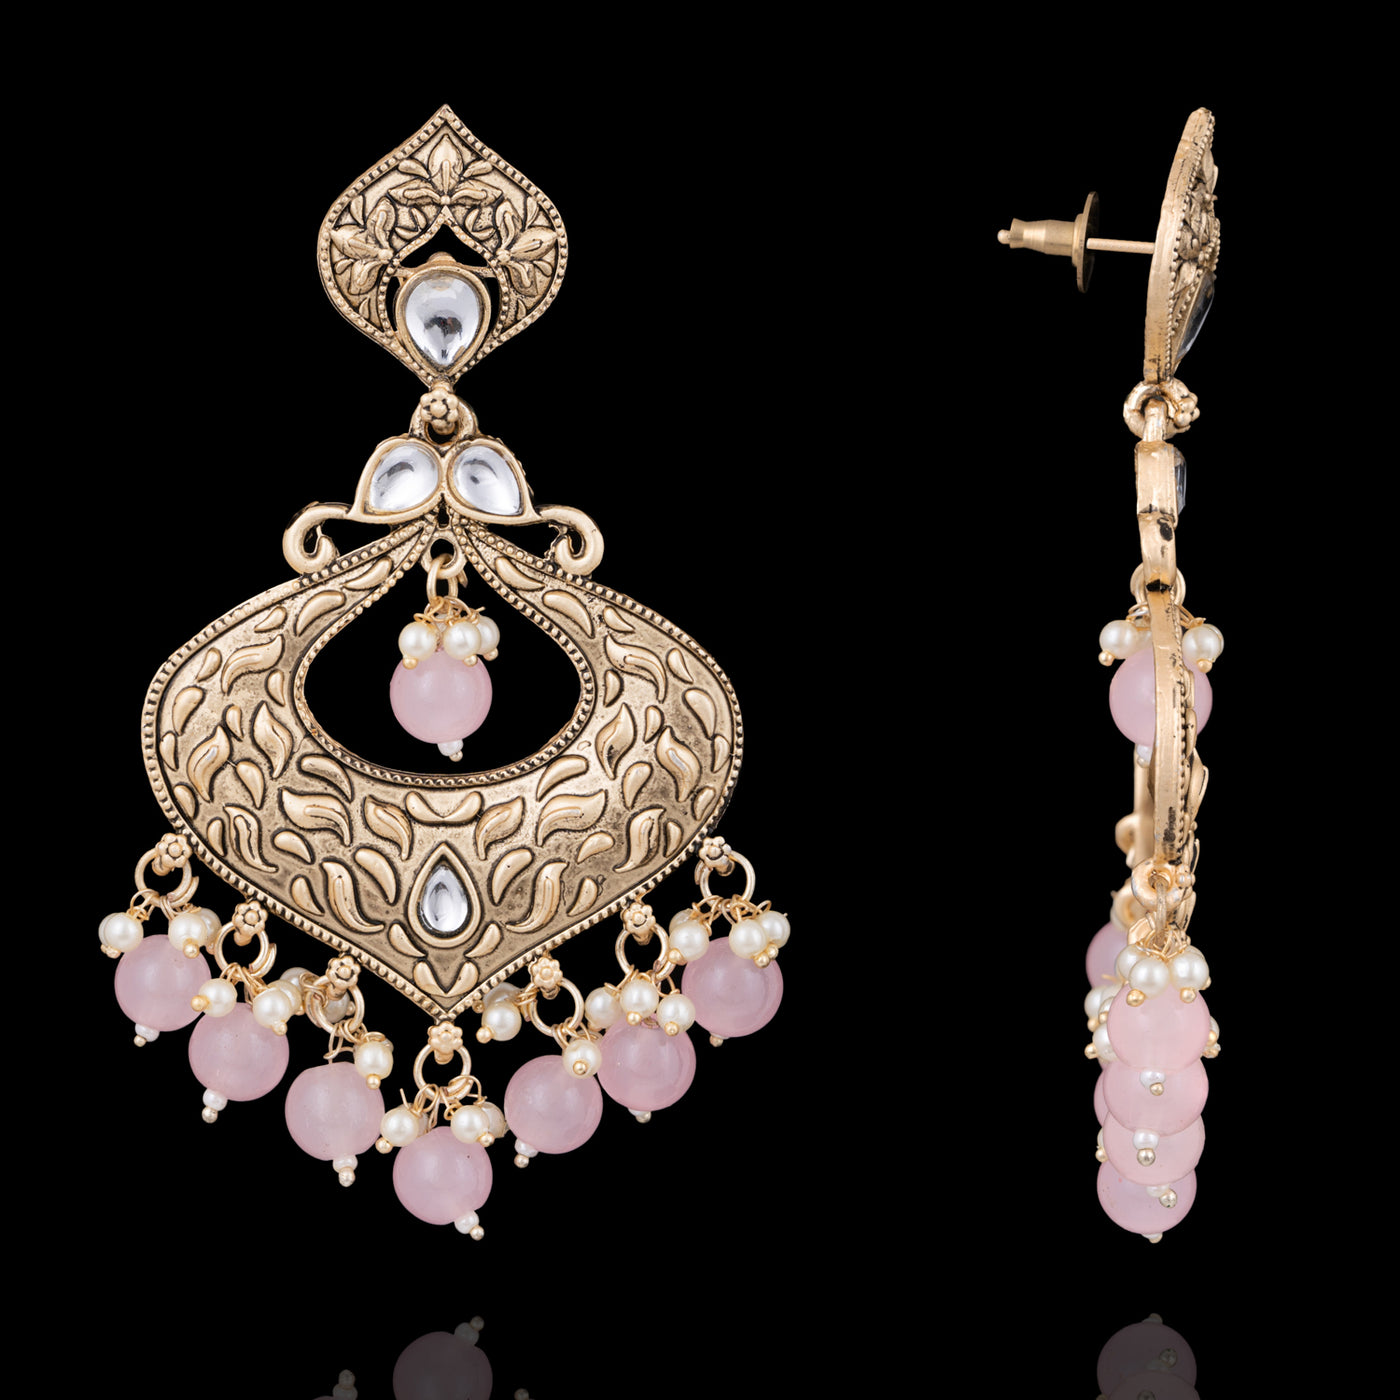 Navneen Earrings - Available in 3 Colors